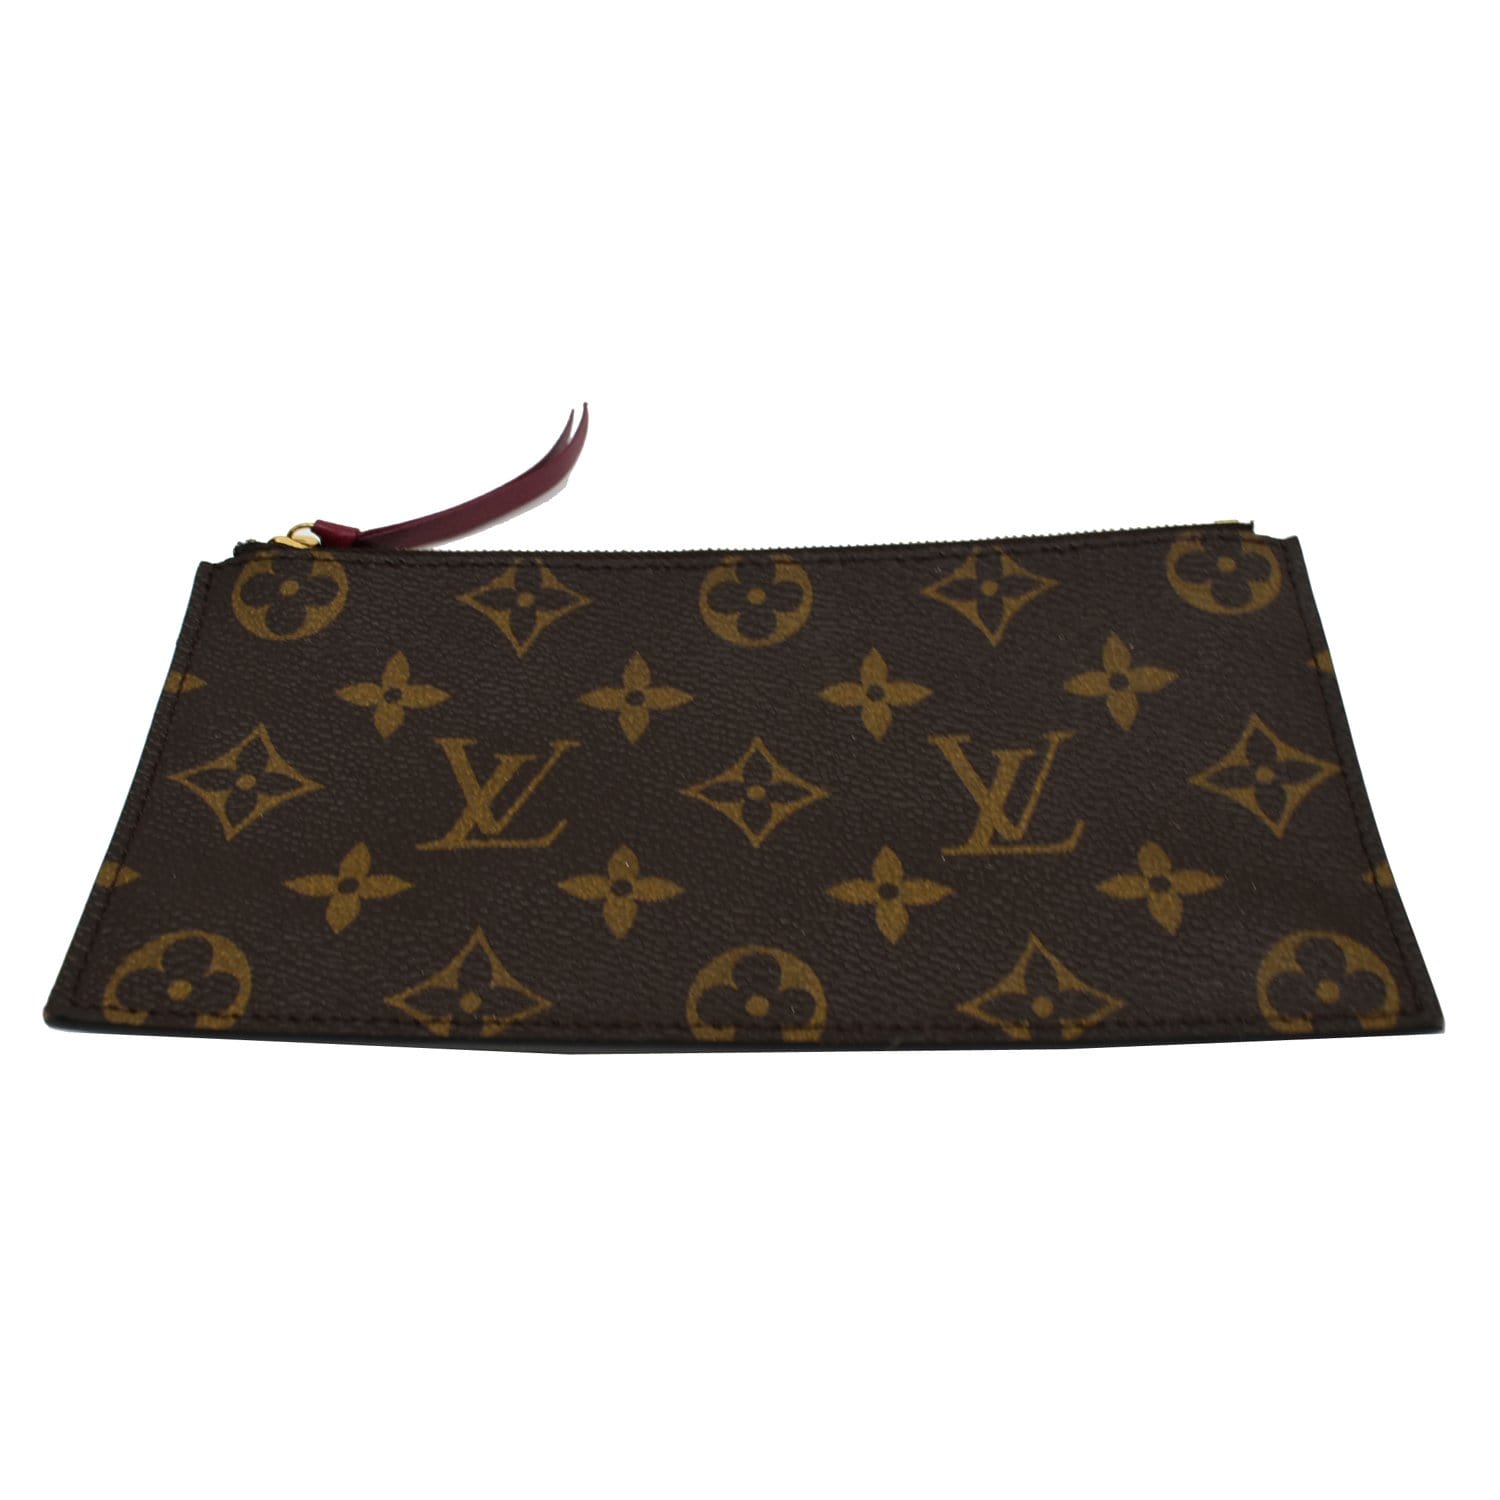 Brand New Authentic Louis Vuitton Felicie Pochette Zippered Leather Insert